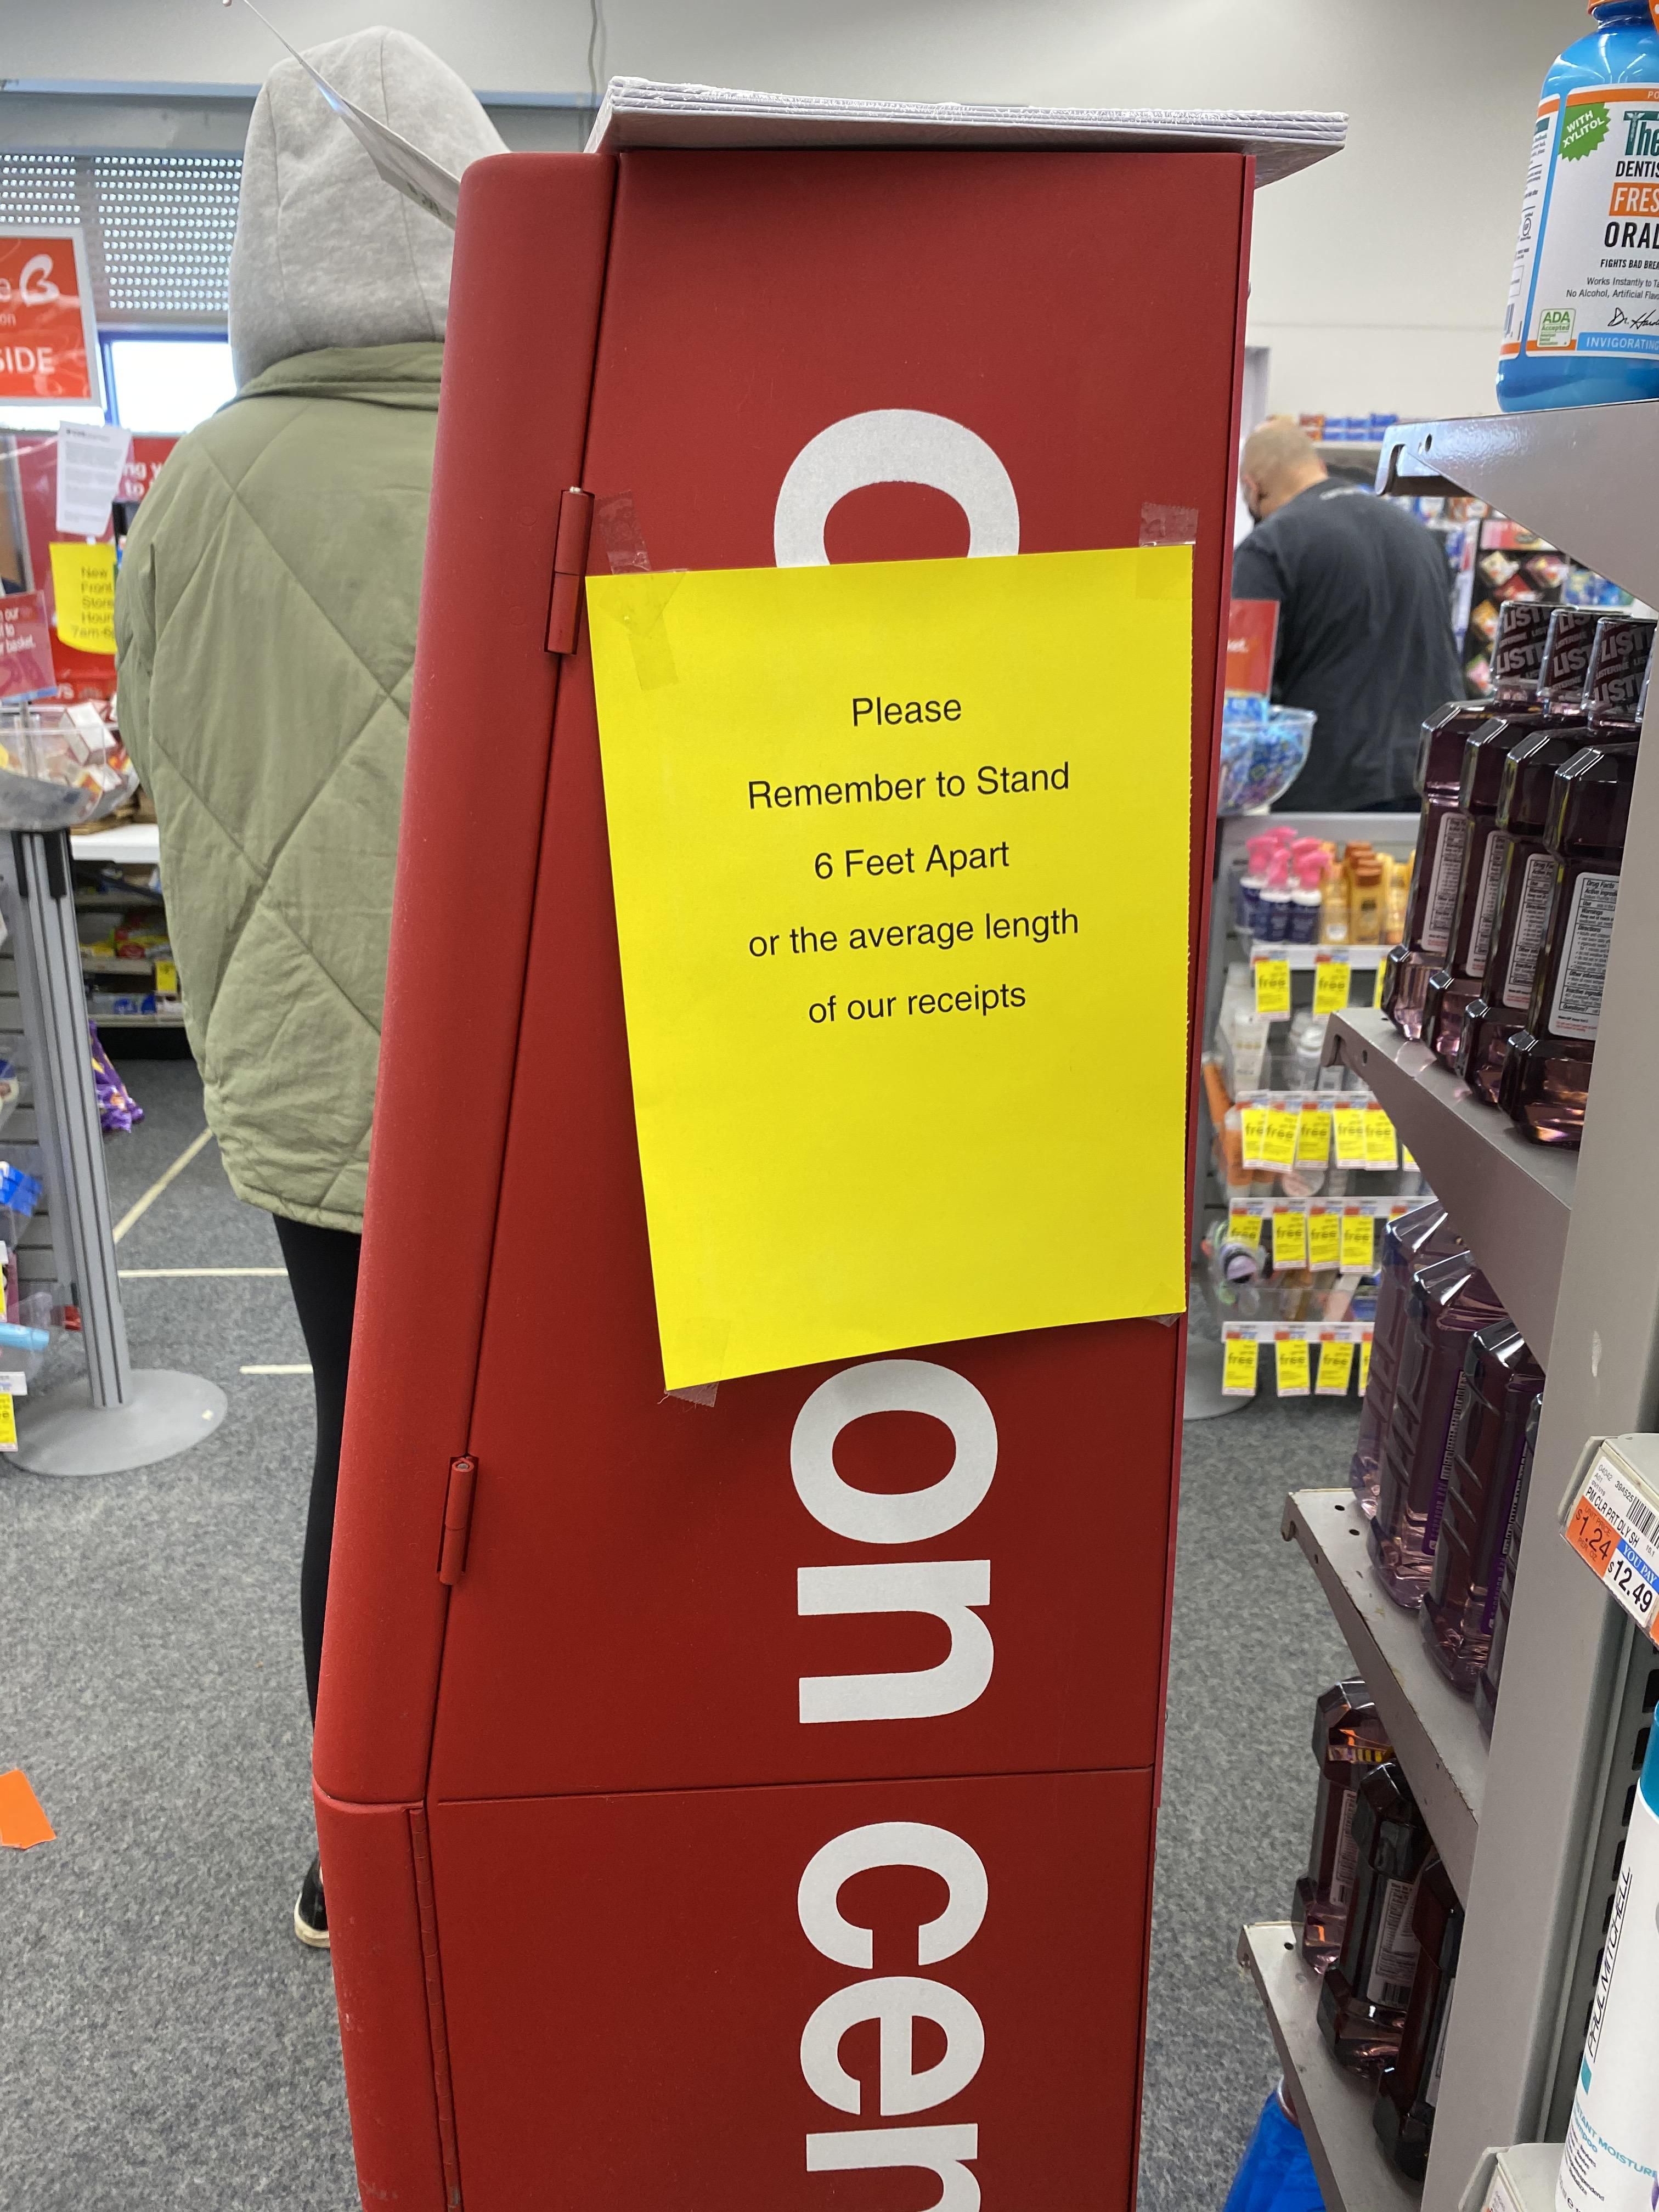 Well played CVS, well played.